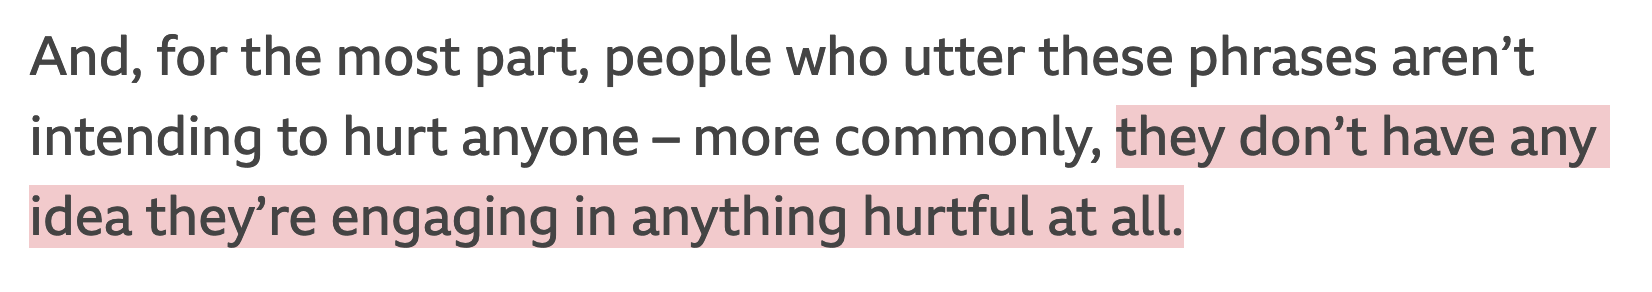 And, for the most part, people who utter these phrases aren’t intending to hurt anyone – more commonly, they don’t have any idea they’re engaging in anything hurtful at all.